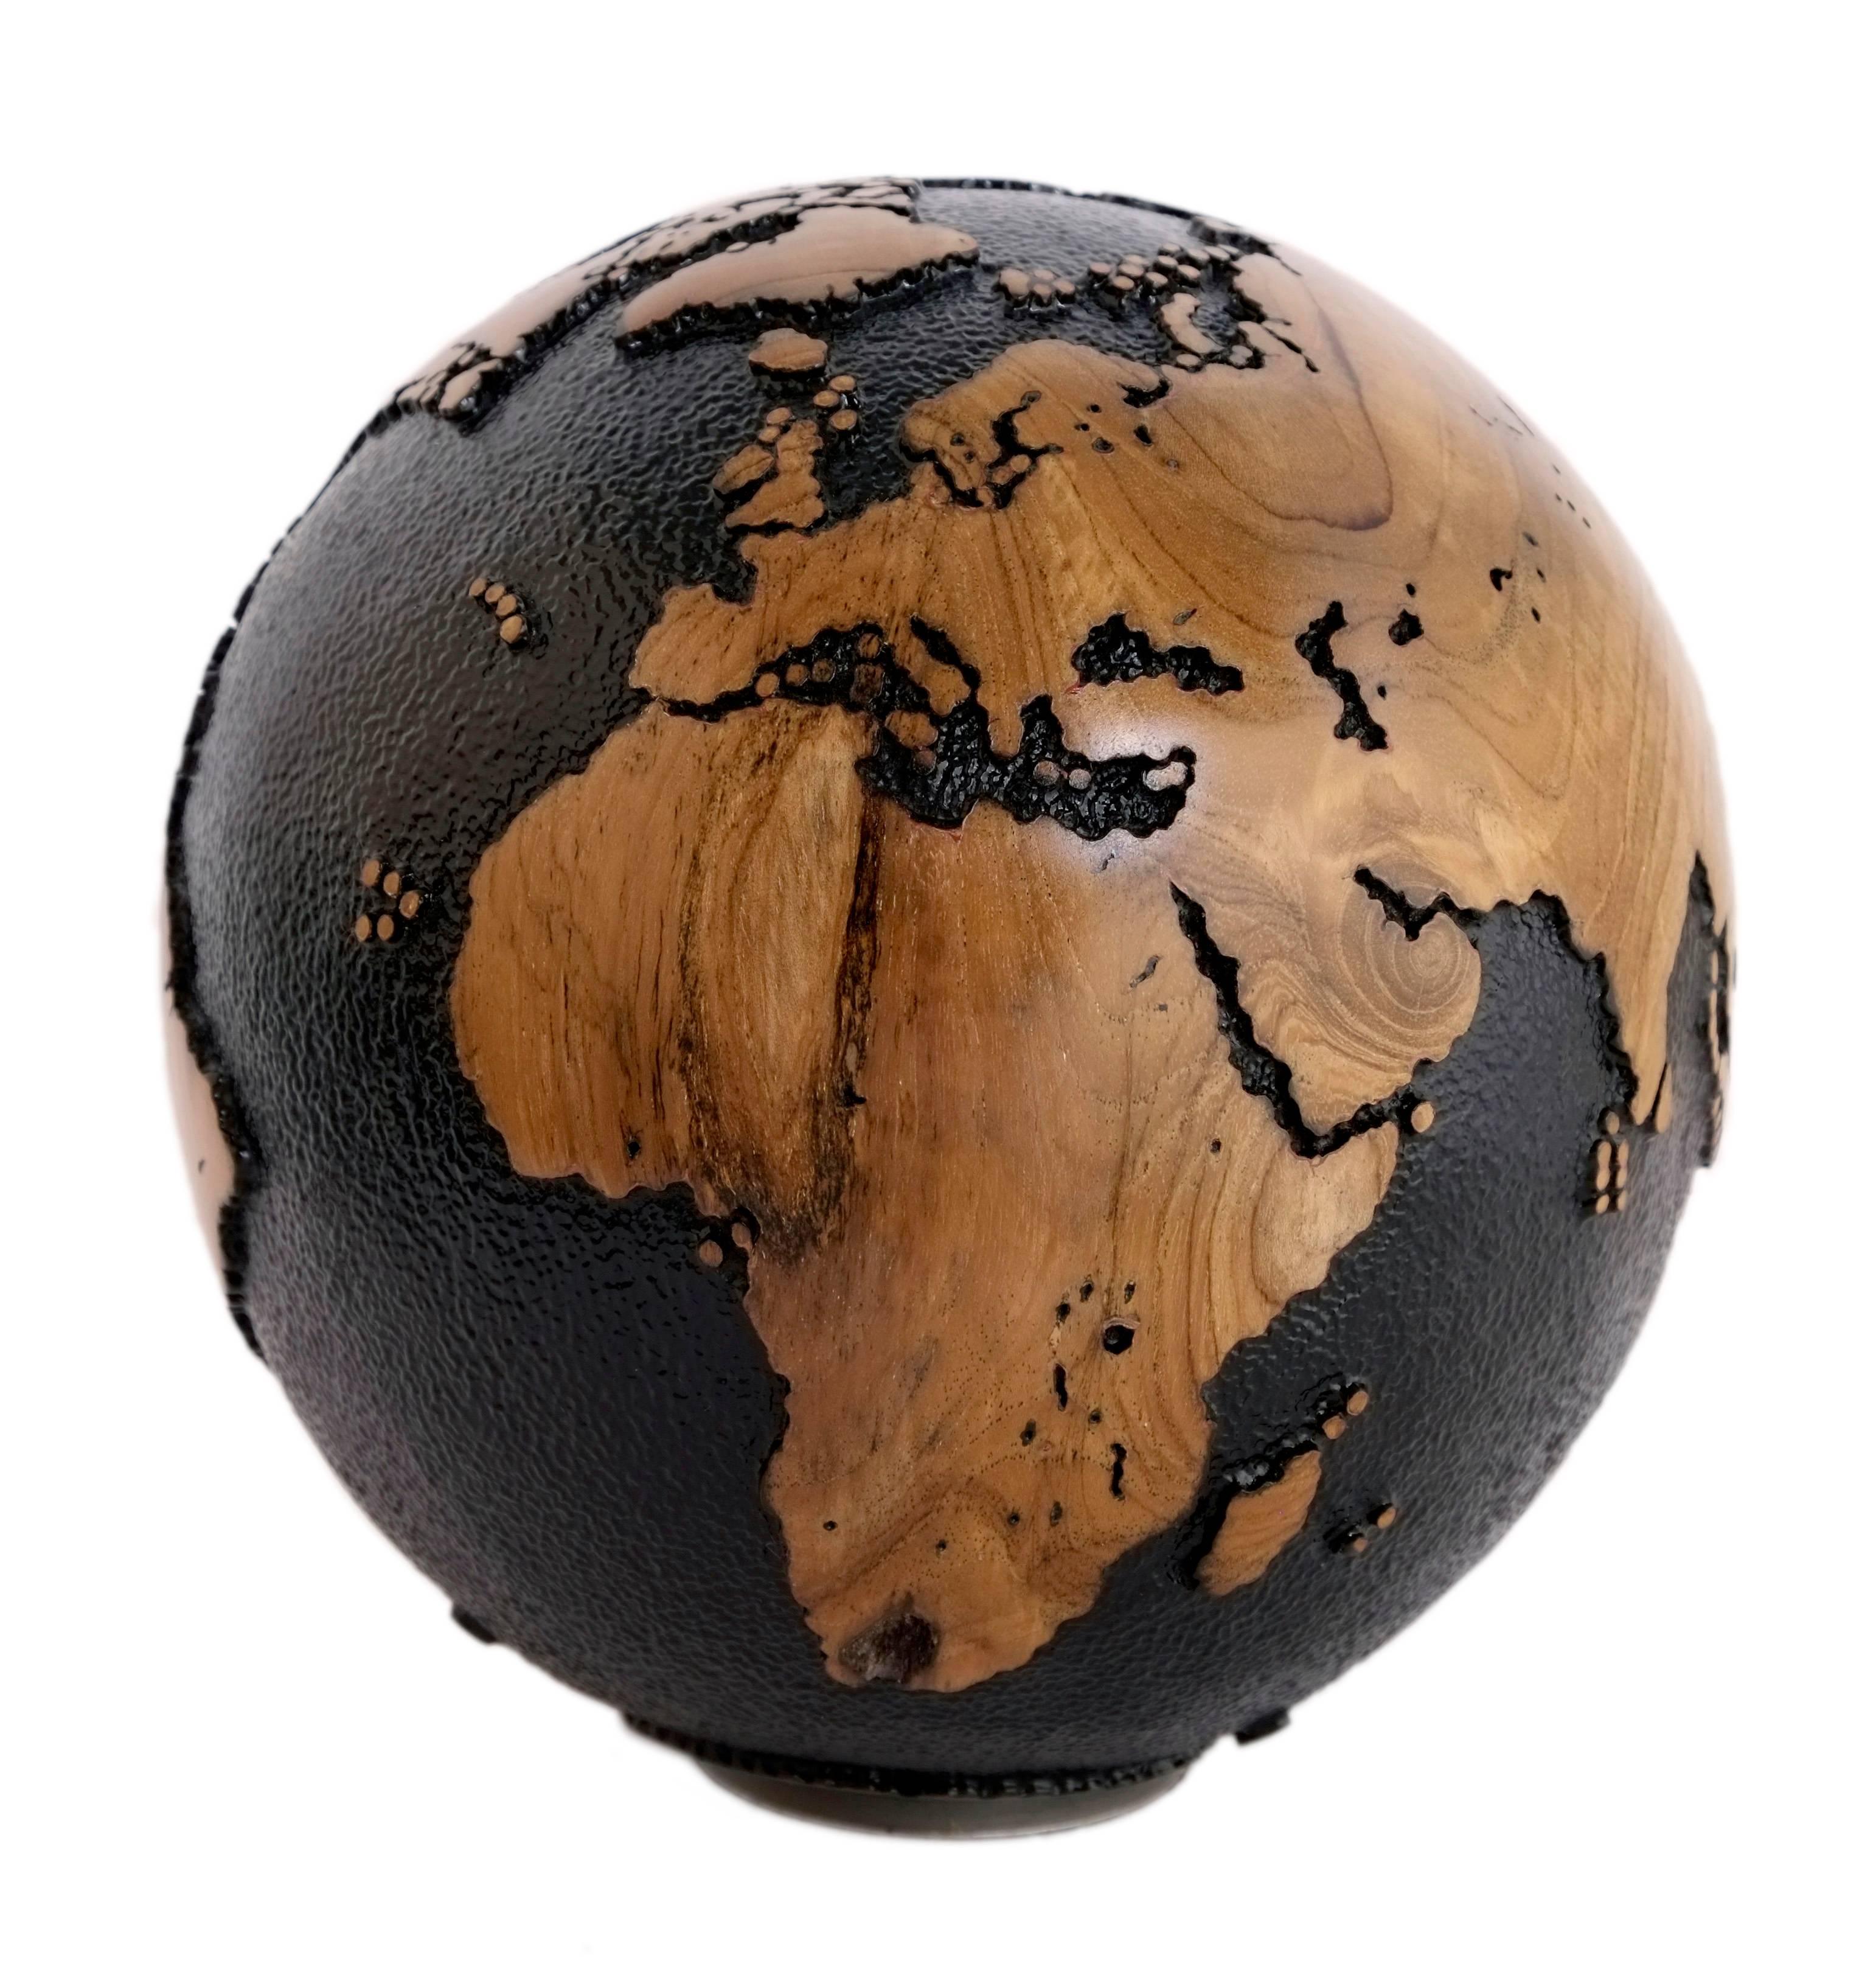 Petite in proportion, grandiose in style.

Elegant black beauty globe, hand-carved wooden globe made from reclaimed teak root, hammered bronze skin textured finishing, black stain, and a touch of 79 pieces of stainless bolts.

Dimension: 7.87 inches